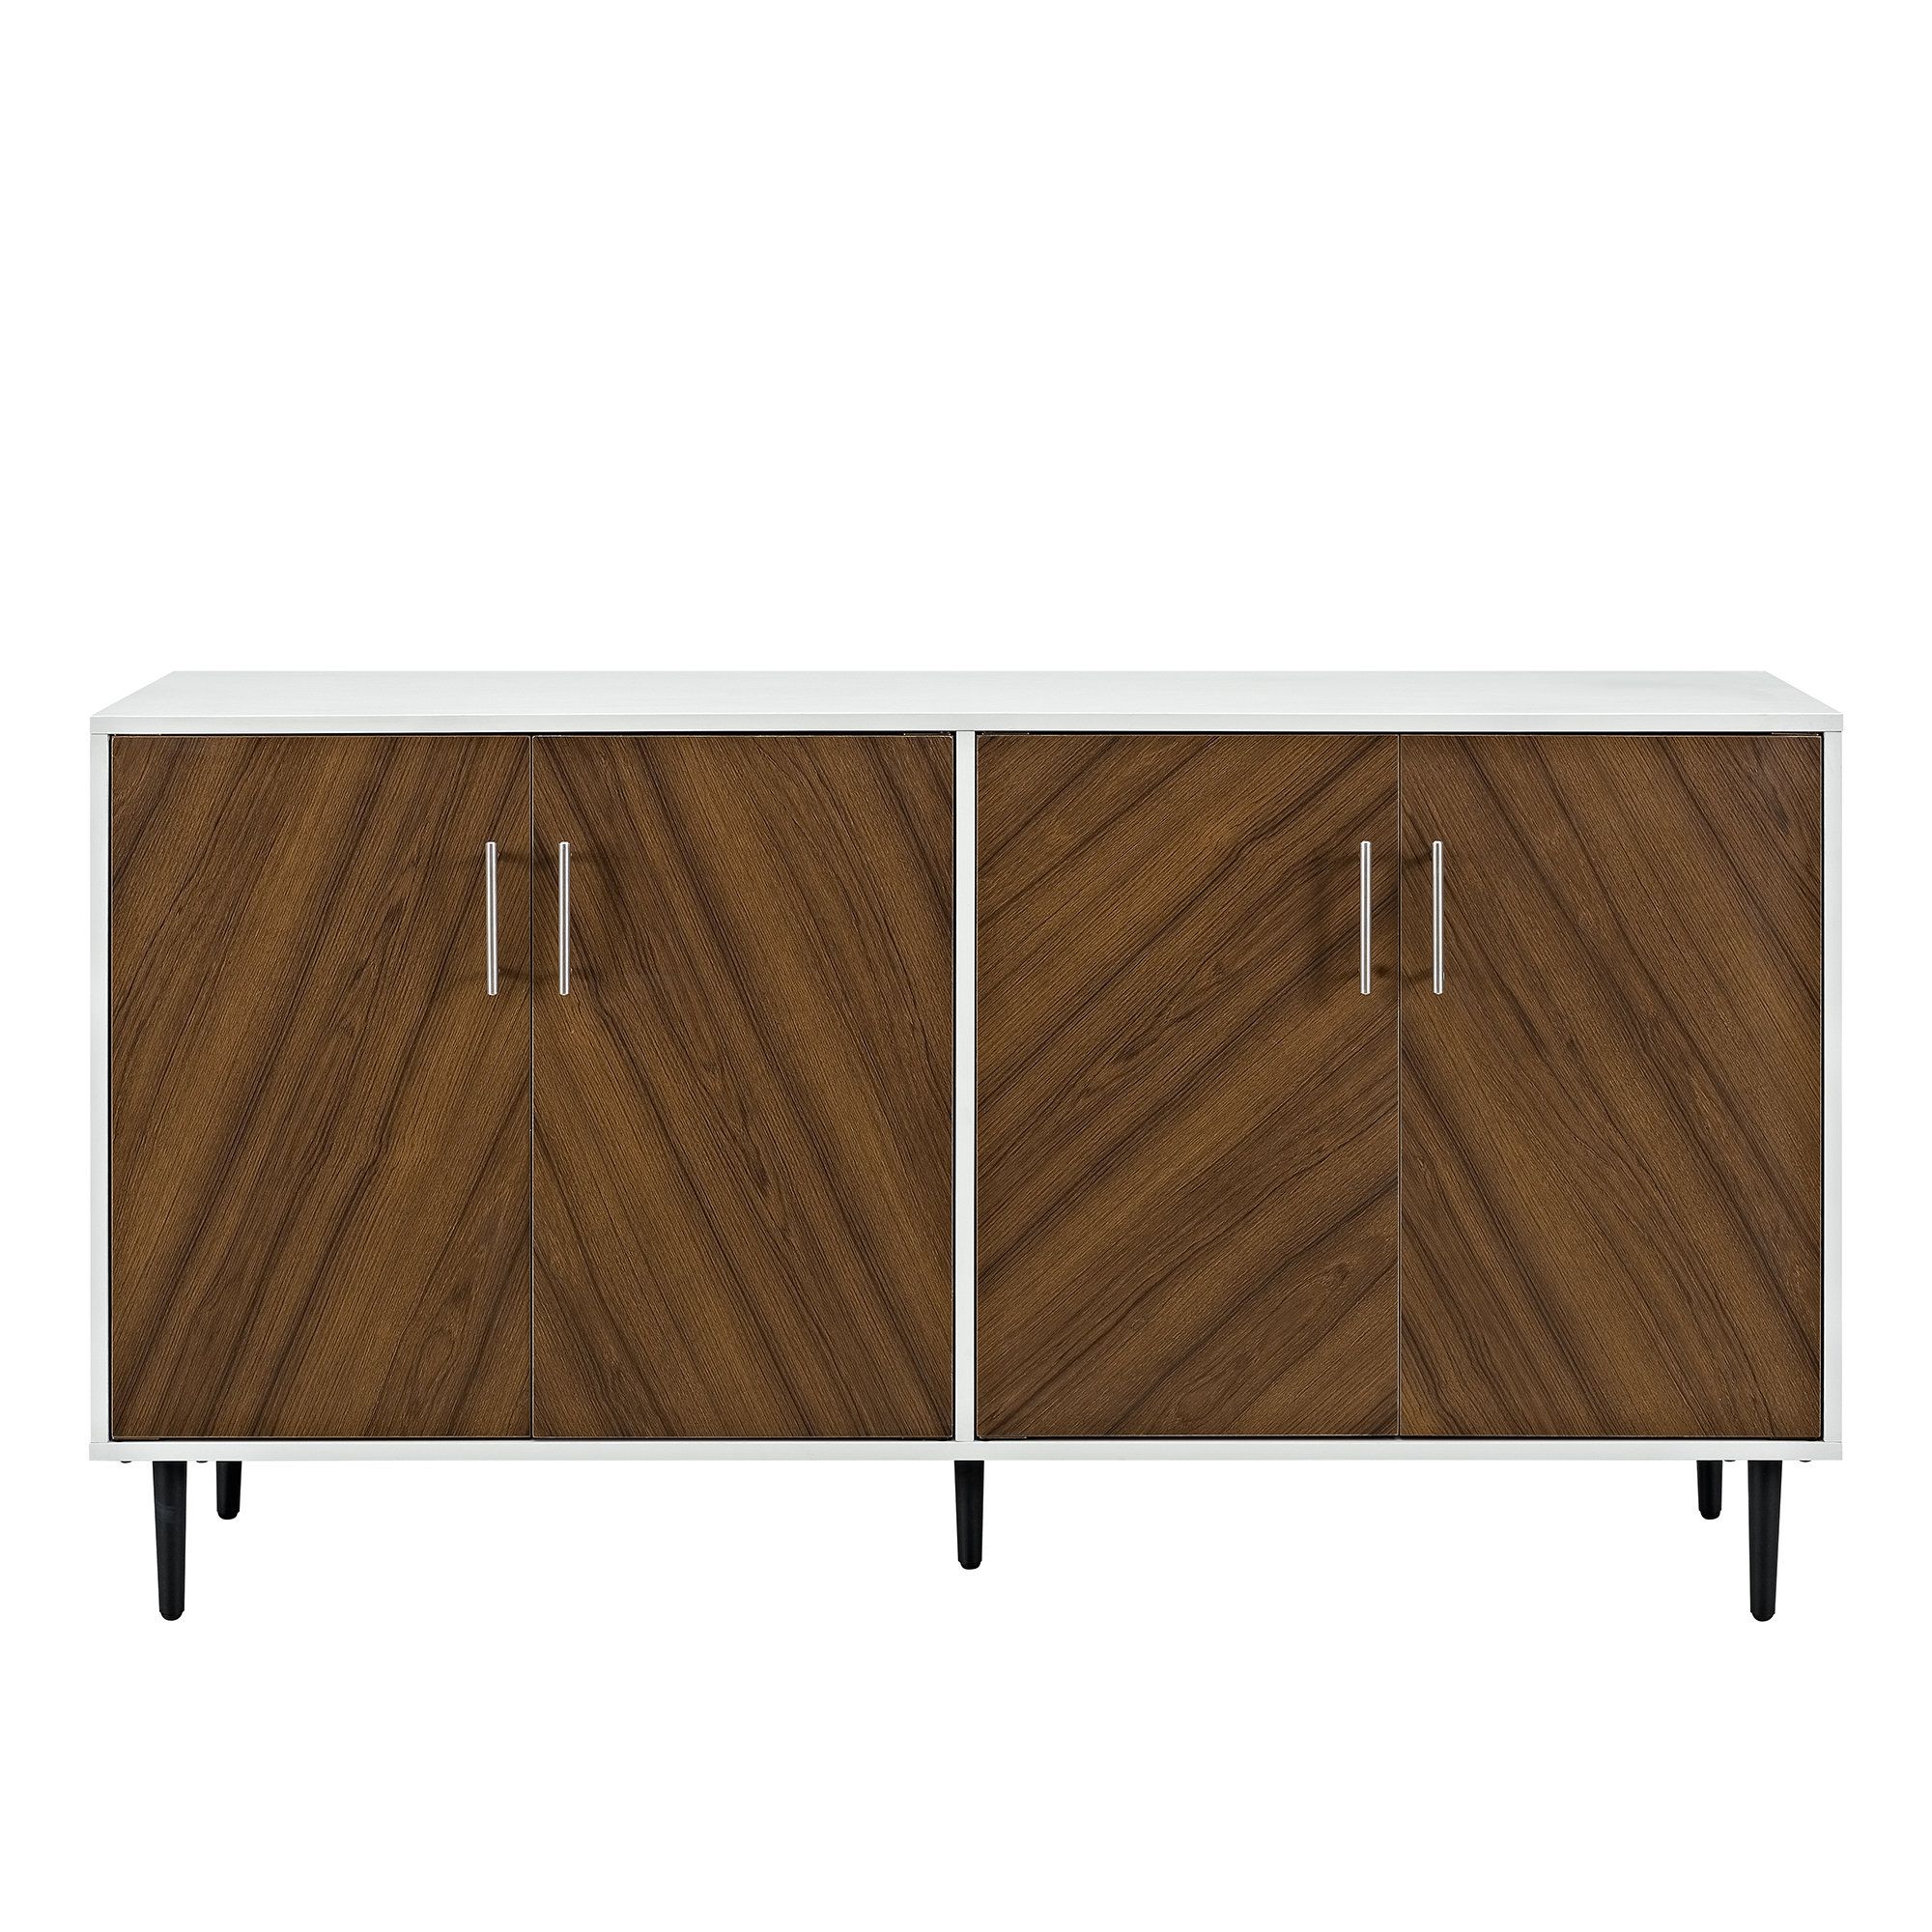 Modern & Contemporary Modern White Credenzas | Allmodern Pertaining To Light White Oak Two Tone Modern Buffets (View 4 of 30)